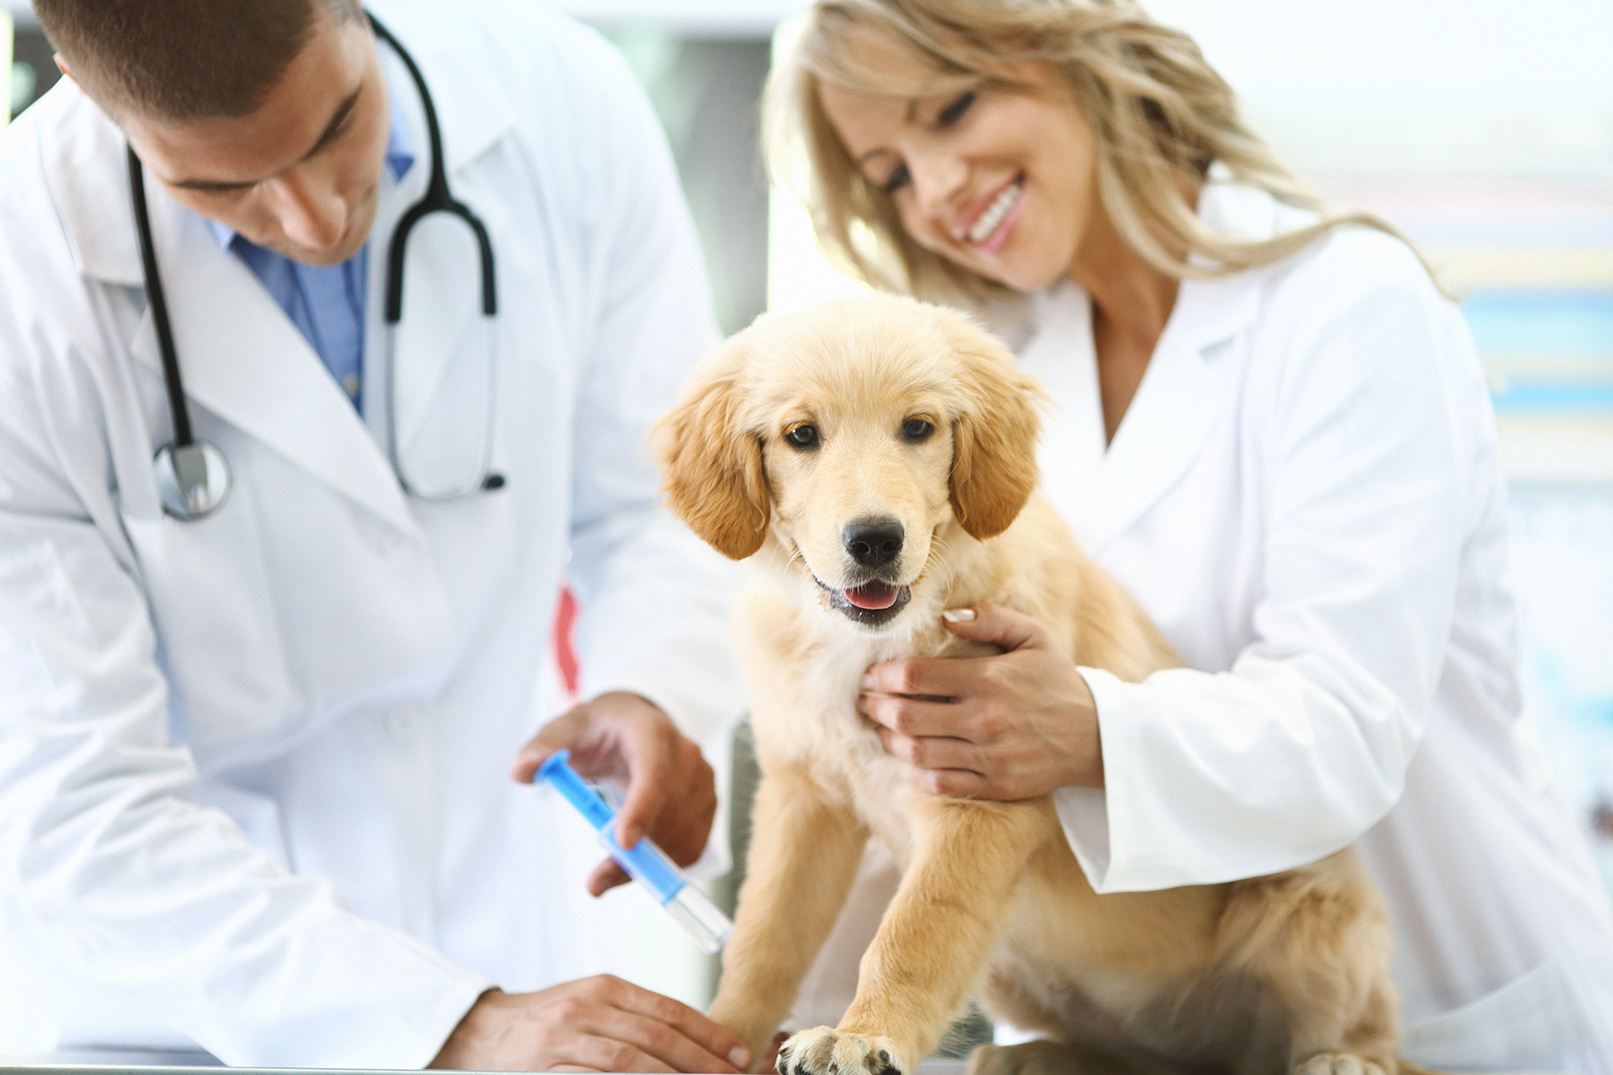 On behalf of its pet and vet financial solutions – CareCredit and Pets Best – Synchrony commissioned the “Lifetime of Care” study to help shed light on the lifetime cost associated with pet care.